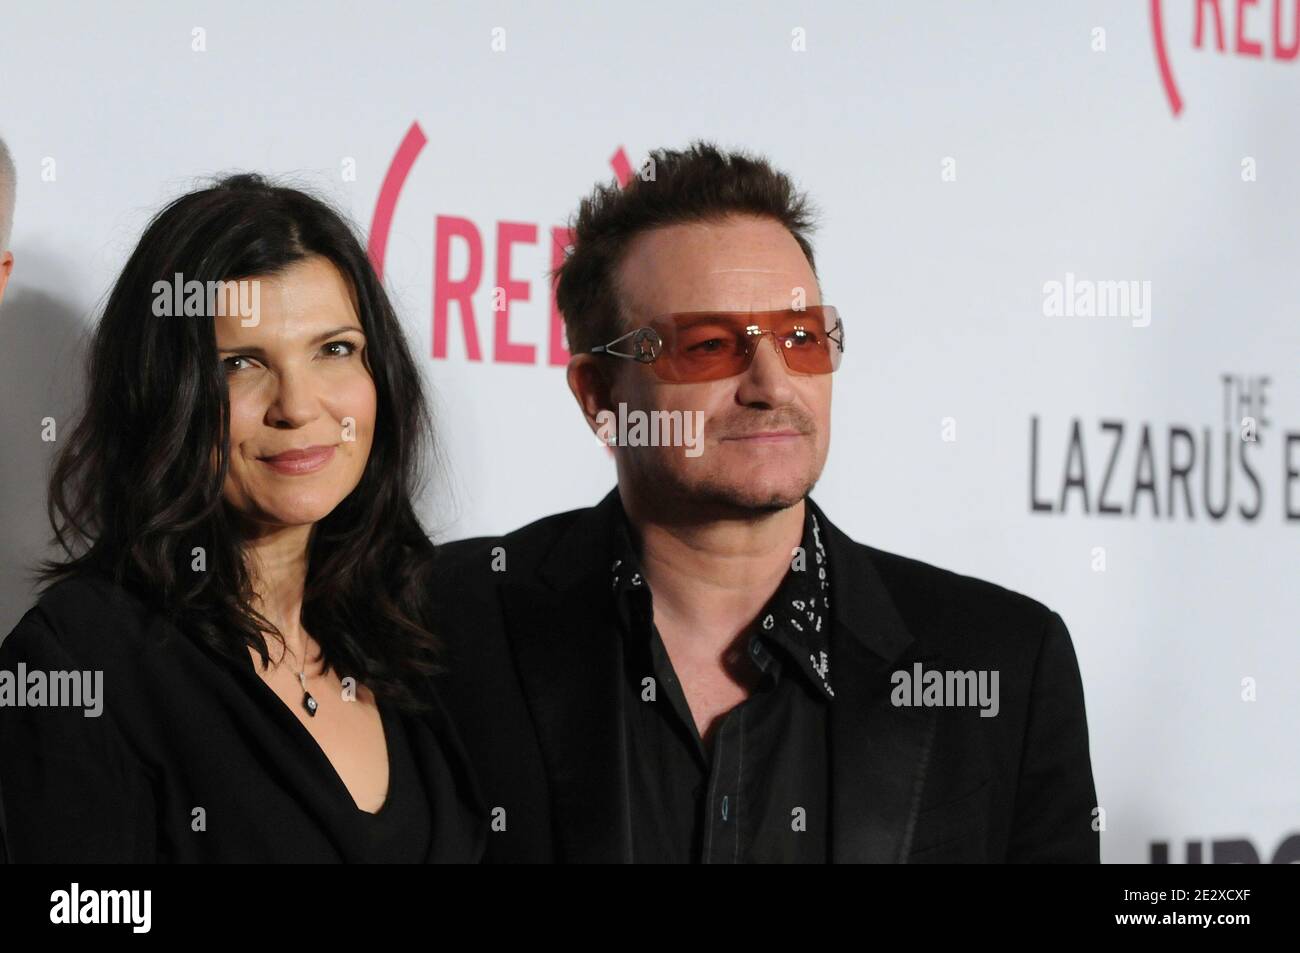 'U2's Bono and wife Ali Hewson arriving for the NY premiere of ''The Lazarus Effect'' at the Museum of Modern Art in New York City, NY, USA on May 4, 2010. Photo by Graylock/ABACAPRESS.COM' Stock Photo